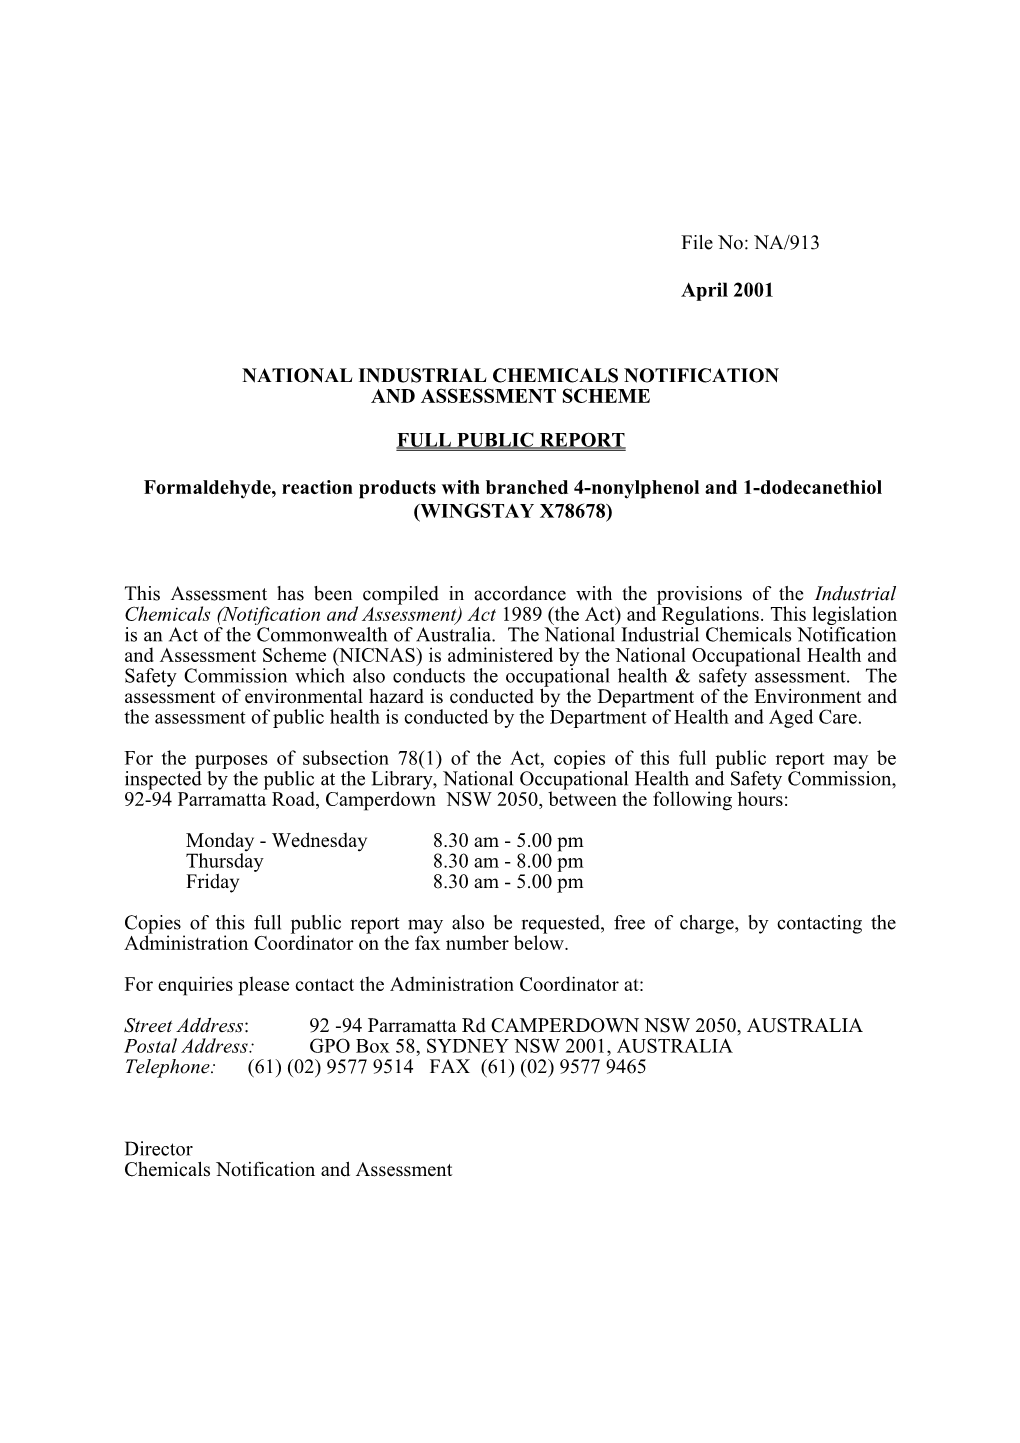 National Industrial Chemicals Notification s1